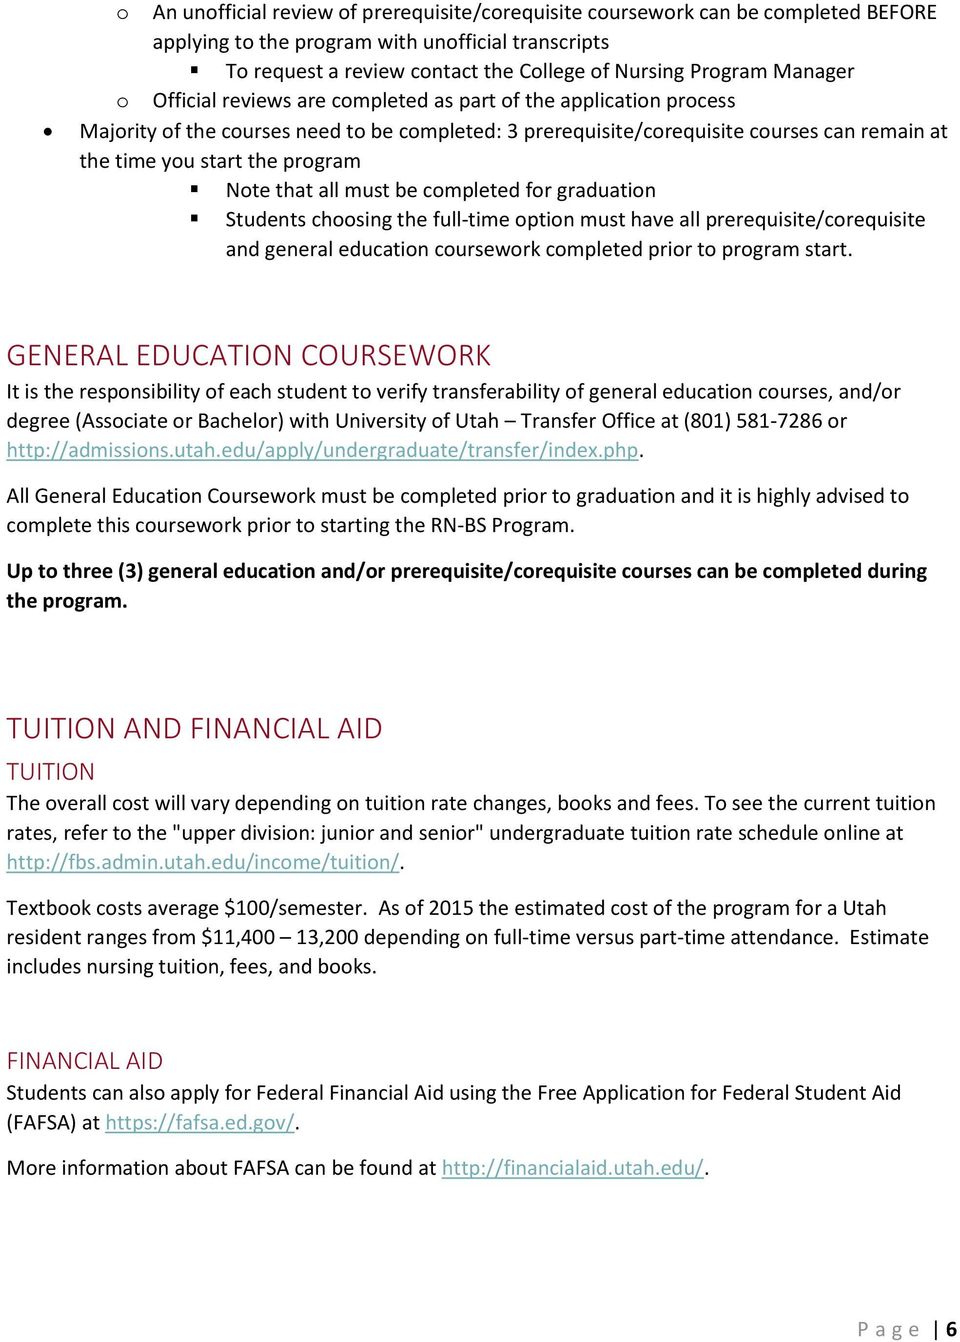 program Note that all must be completed for graduation Students choosing the full-time option must have all prerequisite/corequisite and general education coursework completed prior to program start.